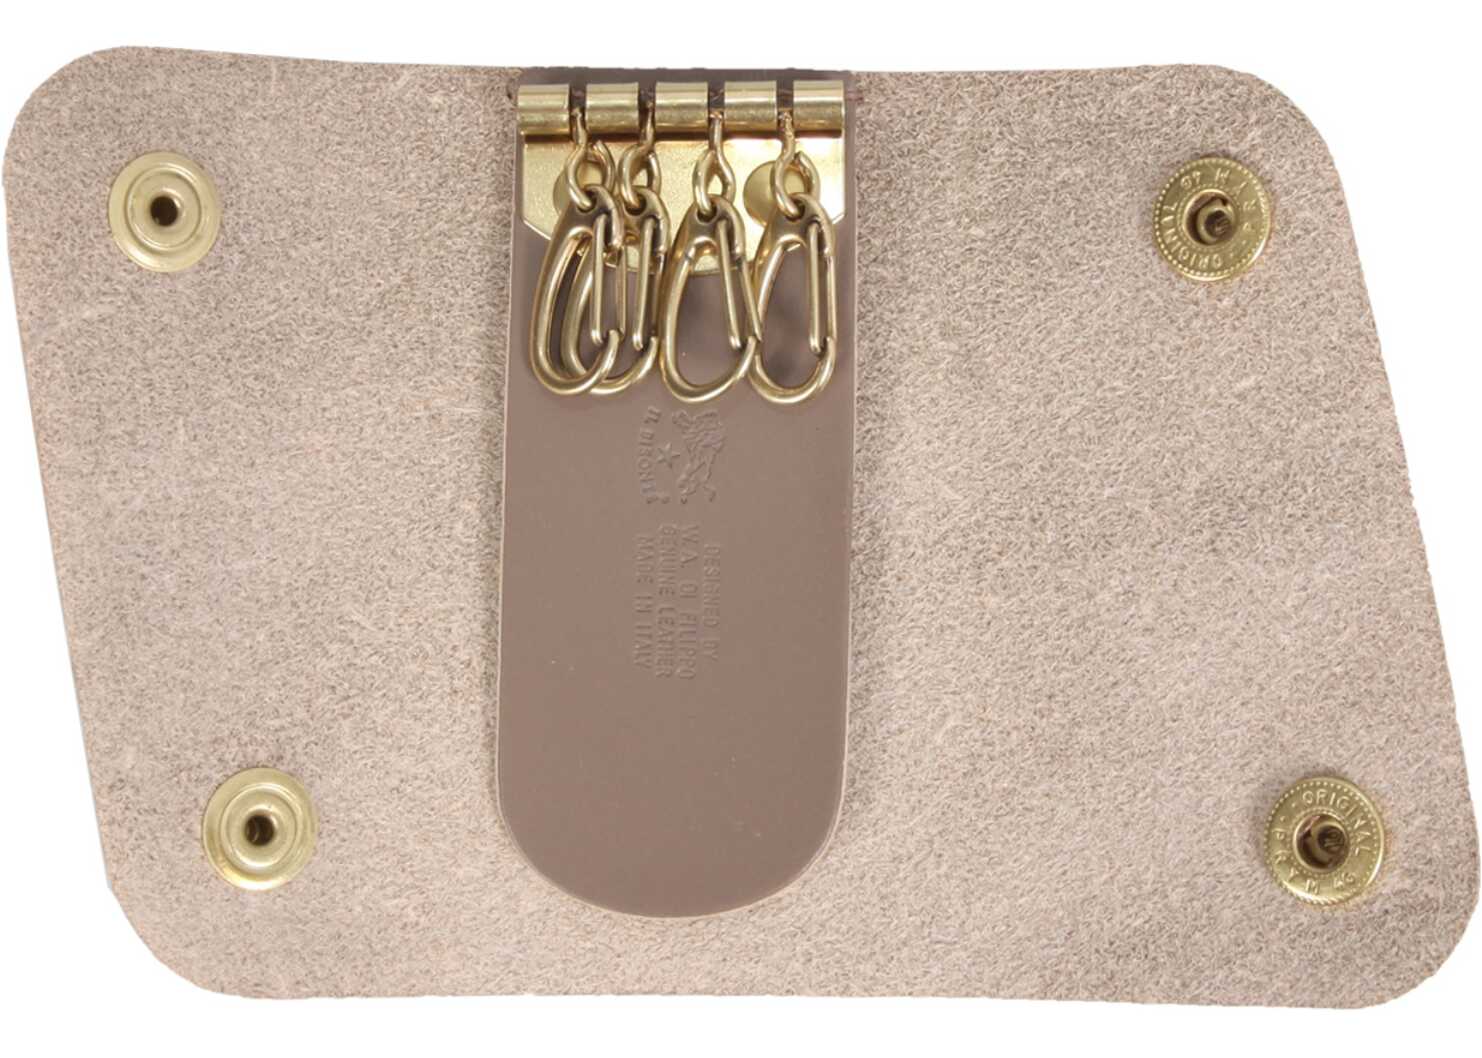 IL BISONTE Leather Key Ring DOVE